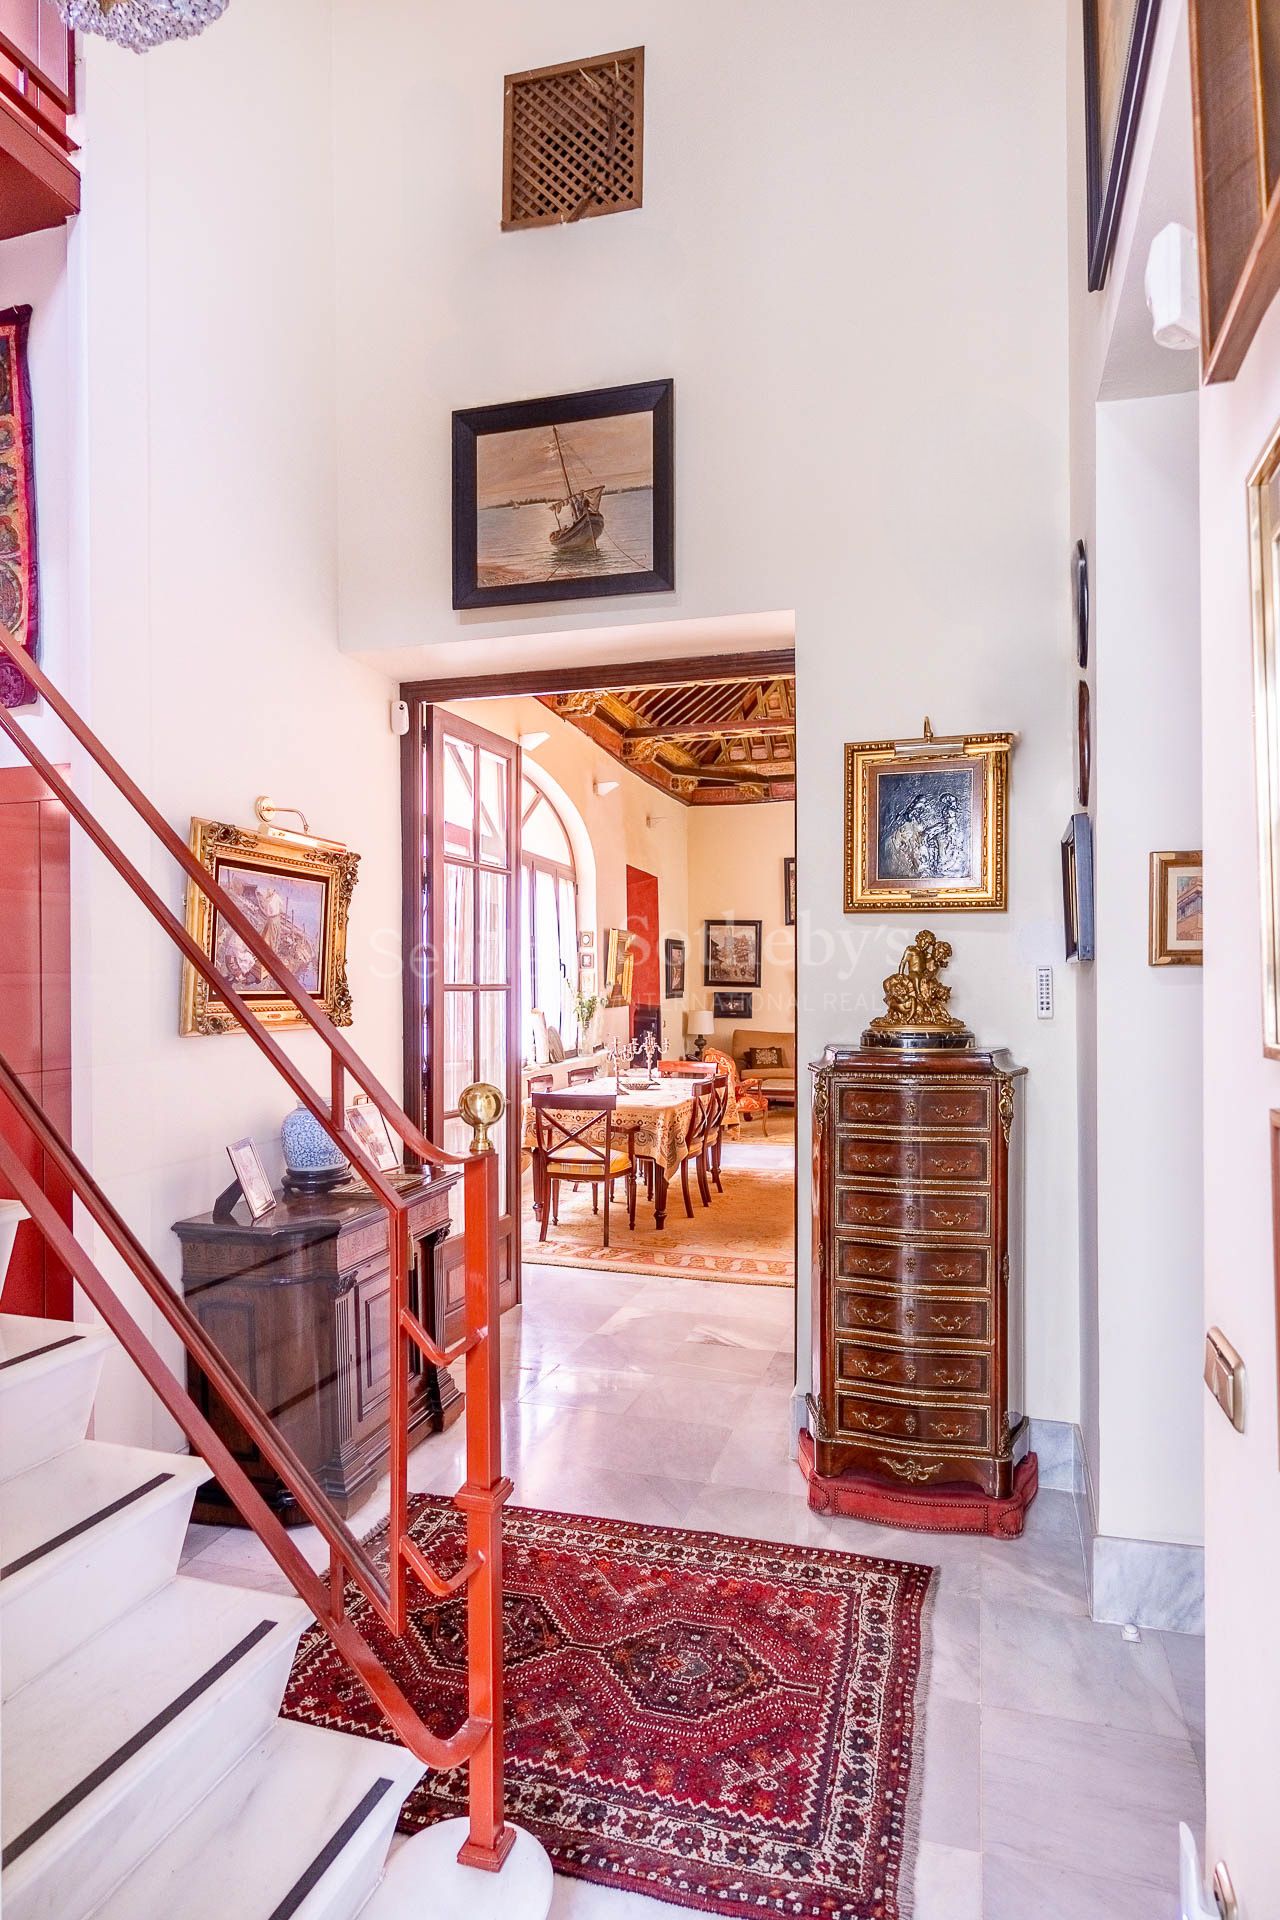 Exclusive duplex in a 16th-century palace house